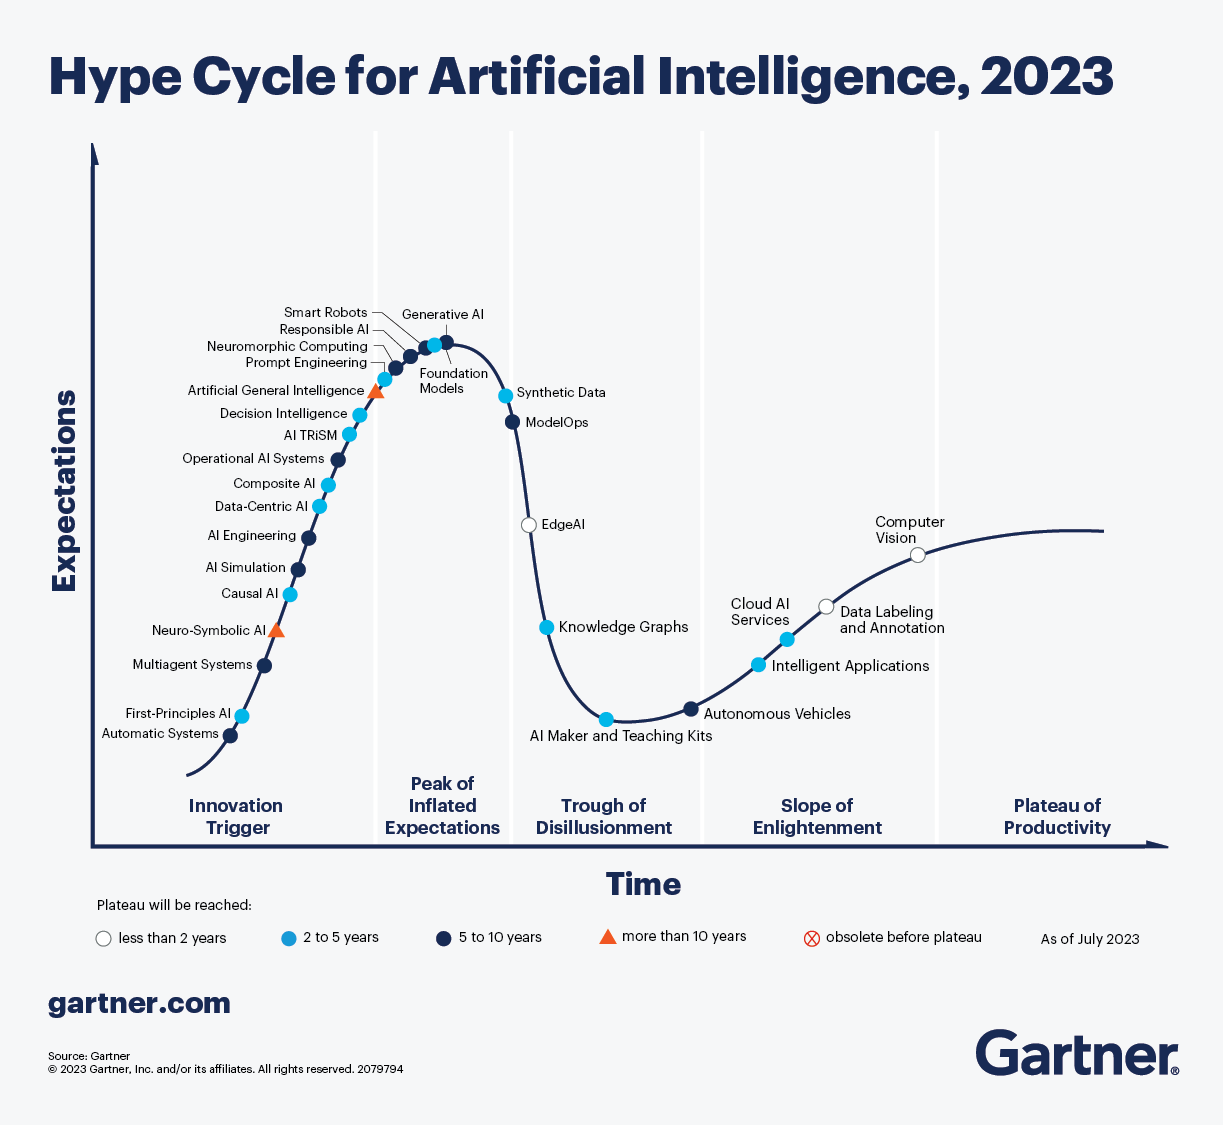 gartner hype cycle for artificial intelligence 2023